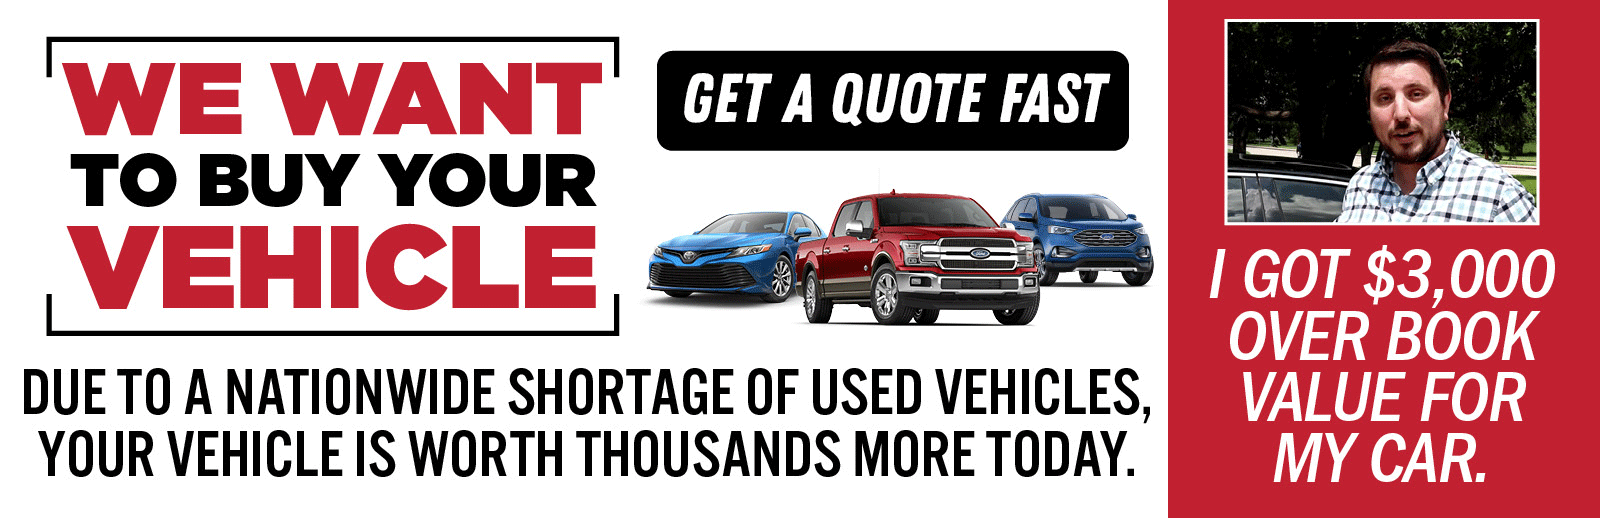 We Want To Buy Your Vehicle